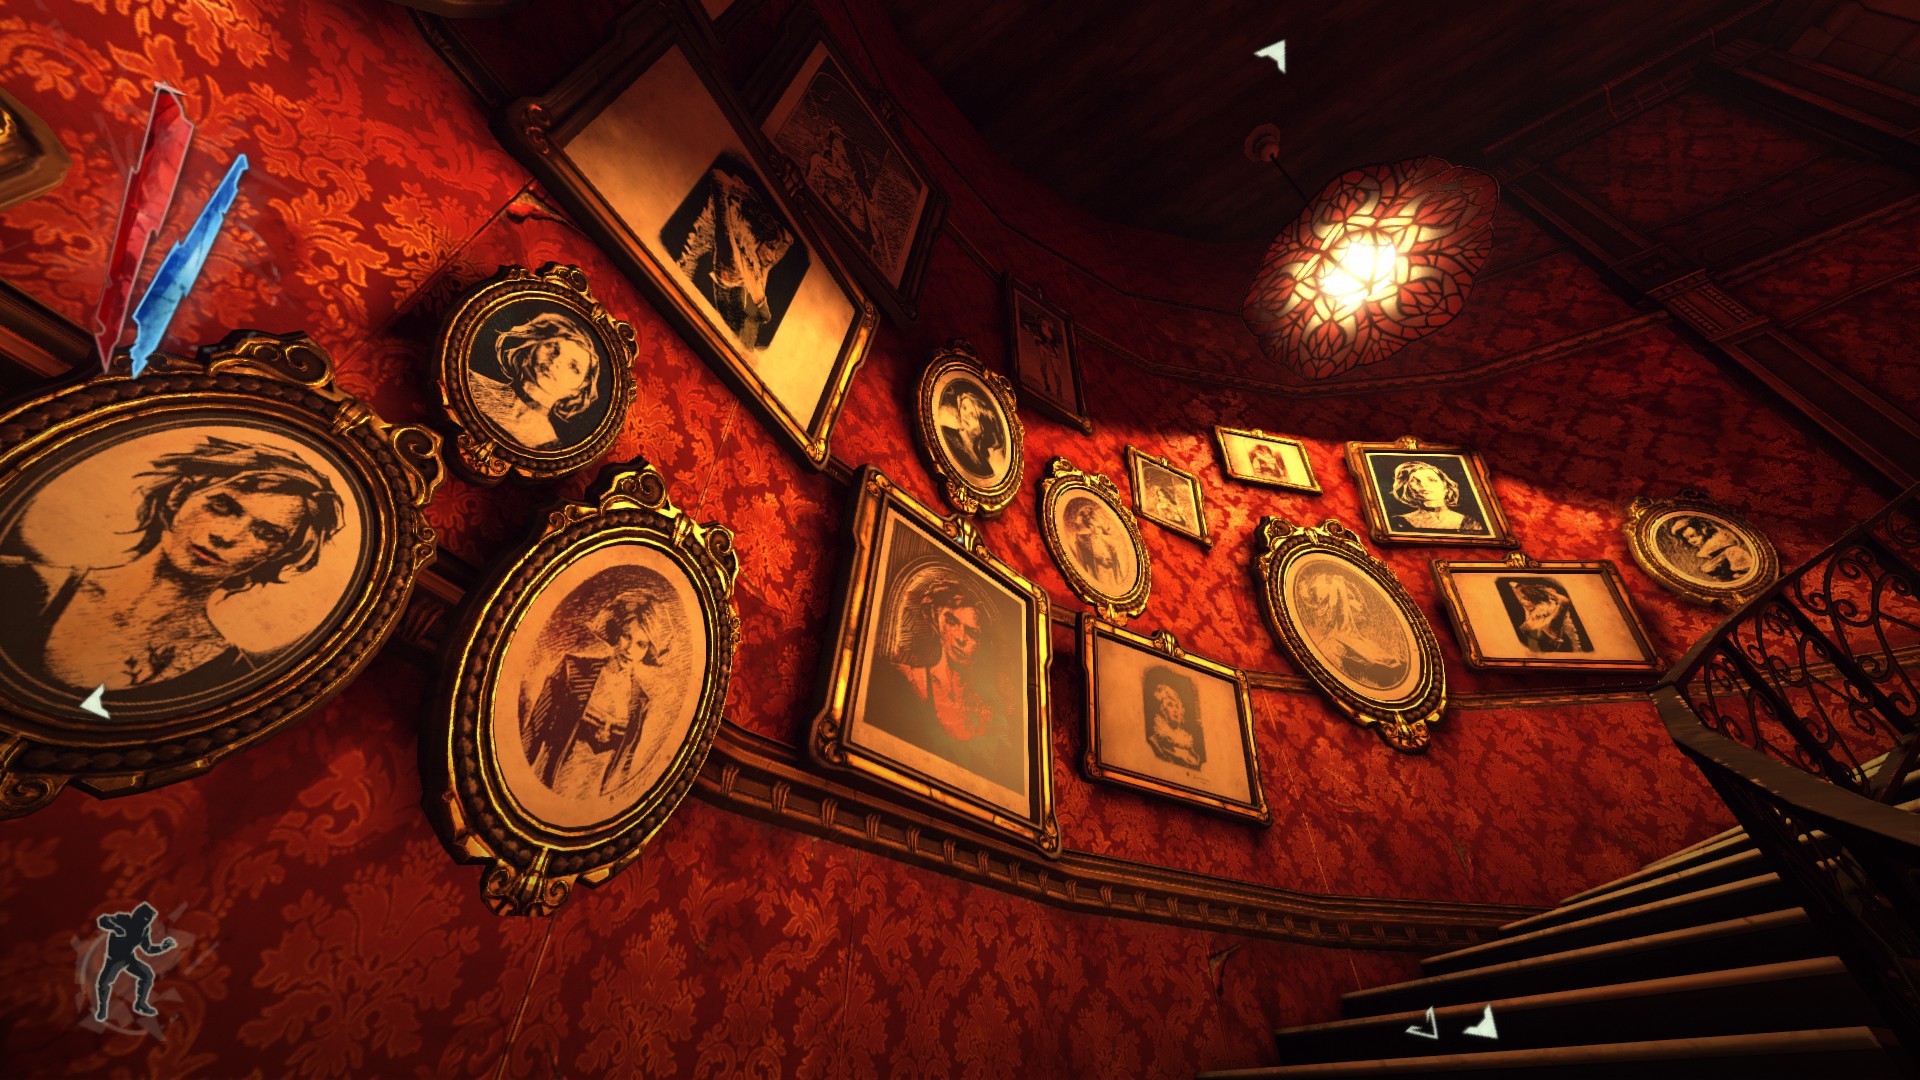 A wall with red wallpaper and filled with portraits.